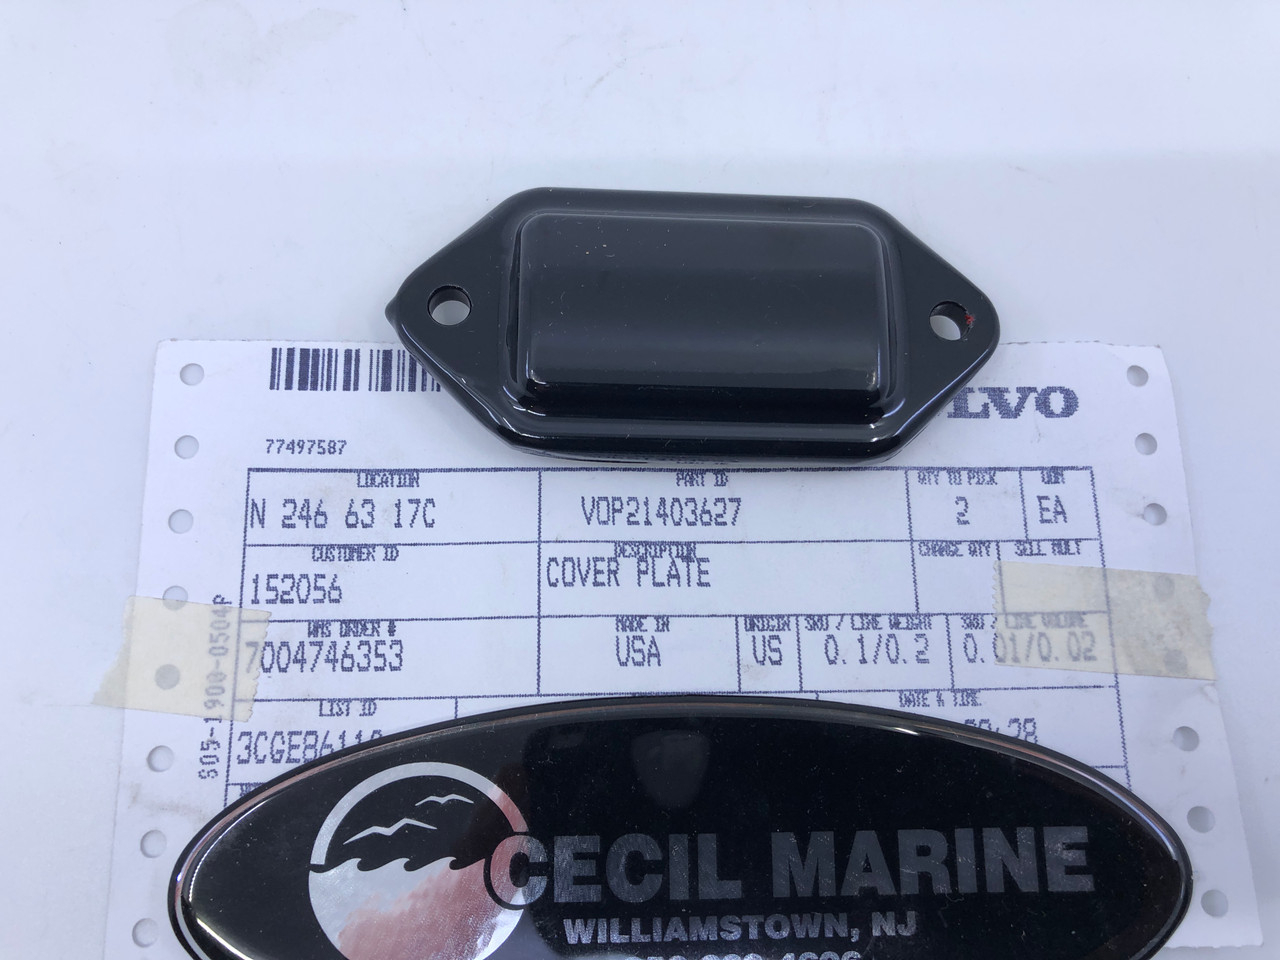 $119.99 * GENUINE VOLVO no tax* COVER PLATE 21403627 *In Stock & Ready To Ship!